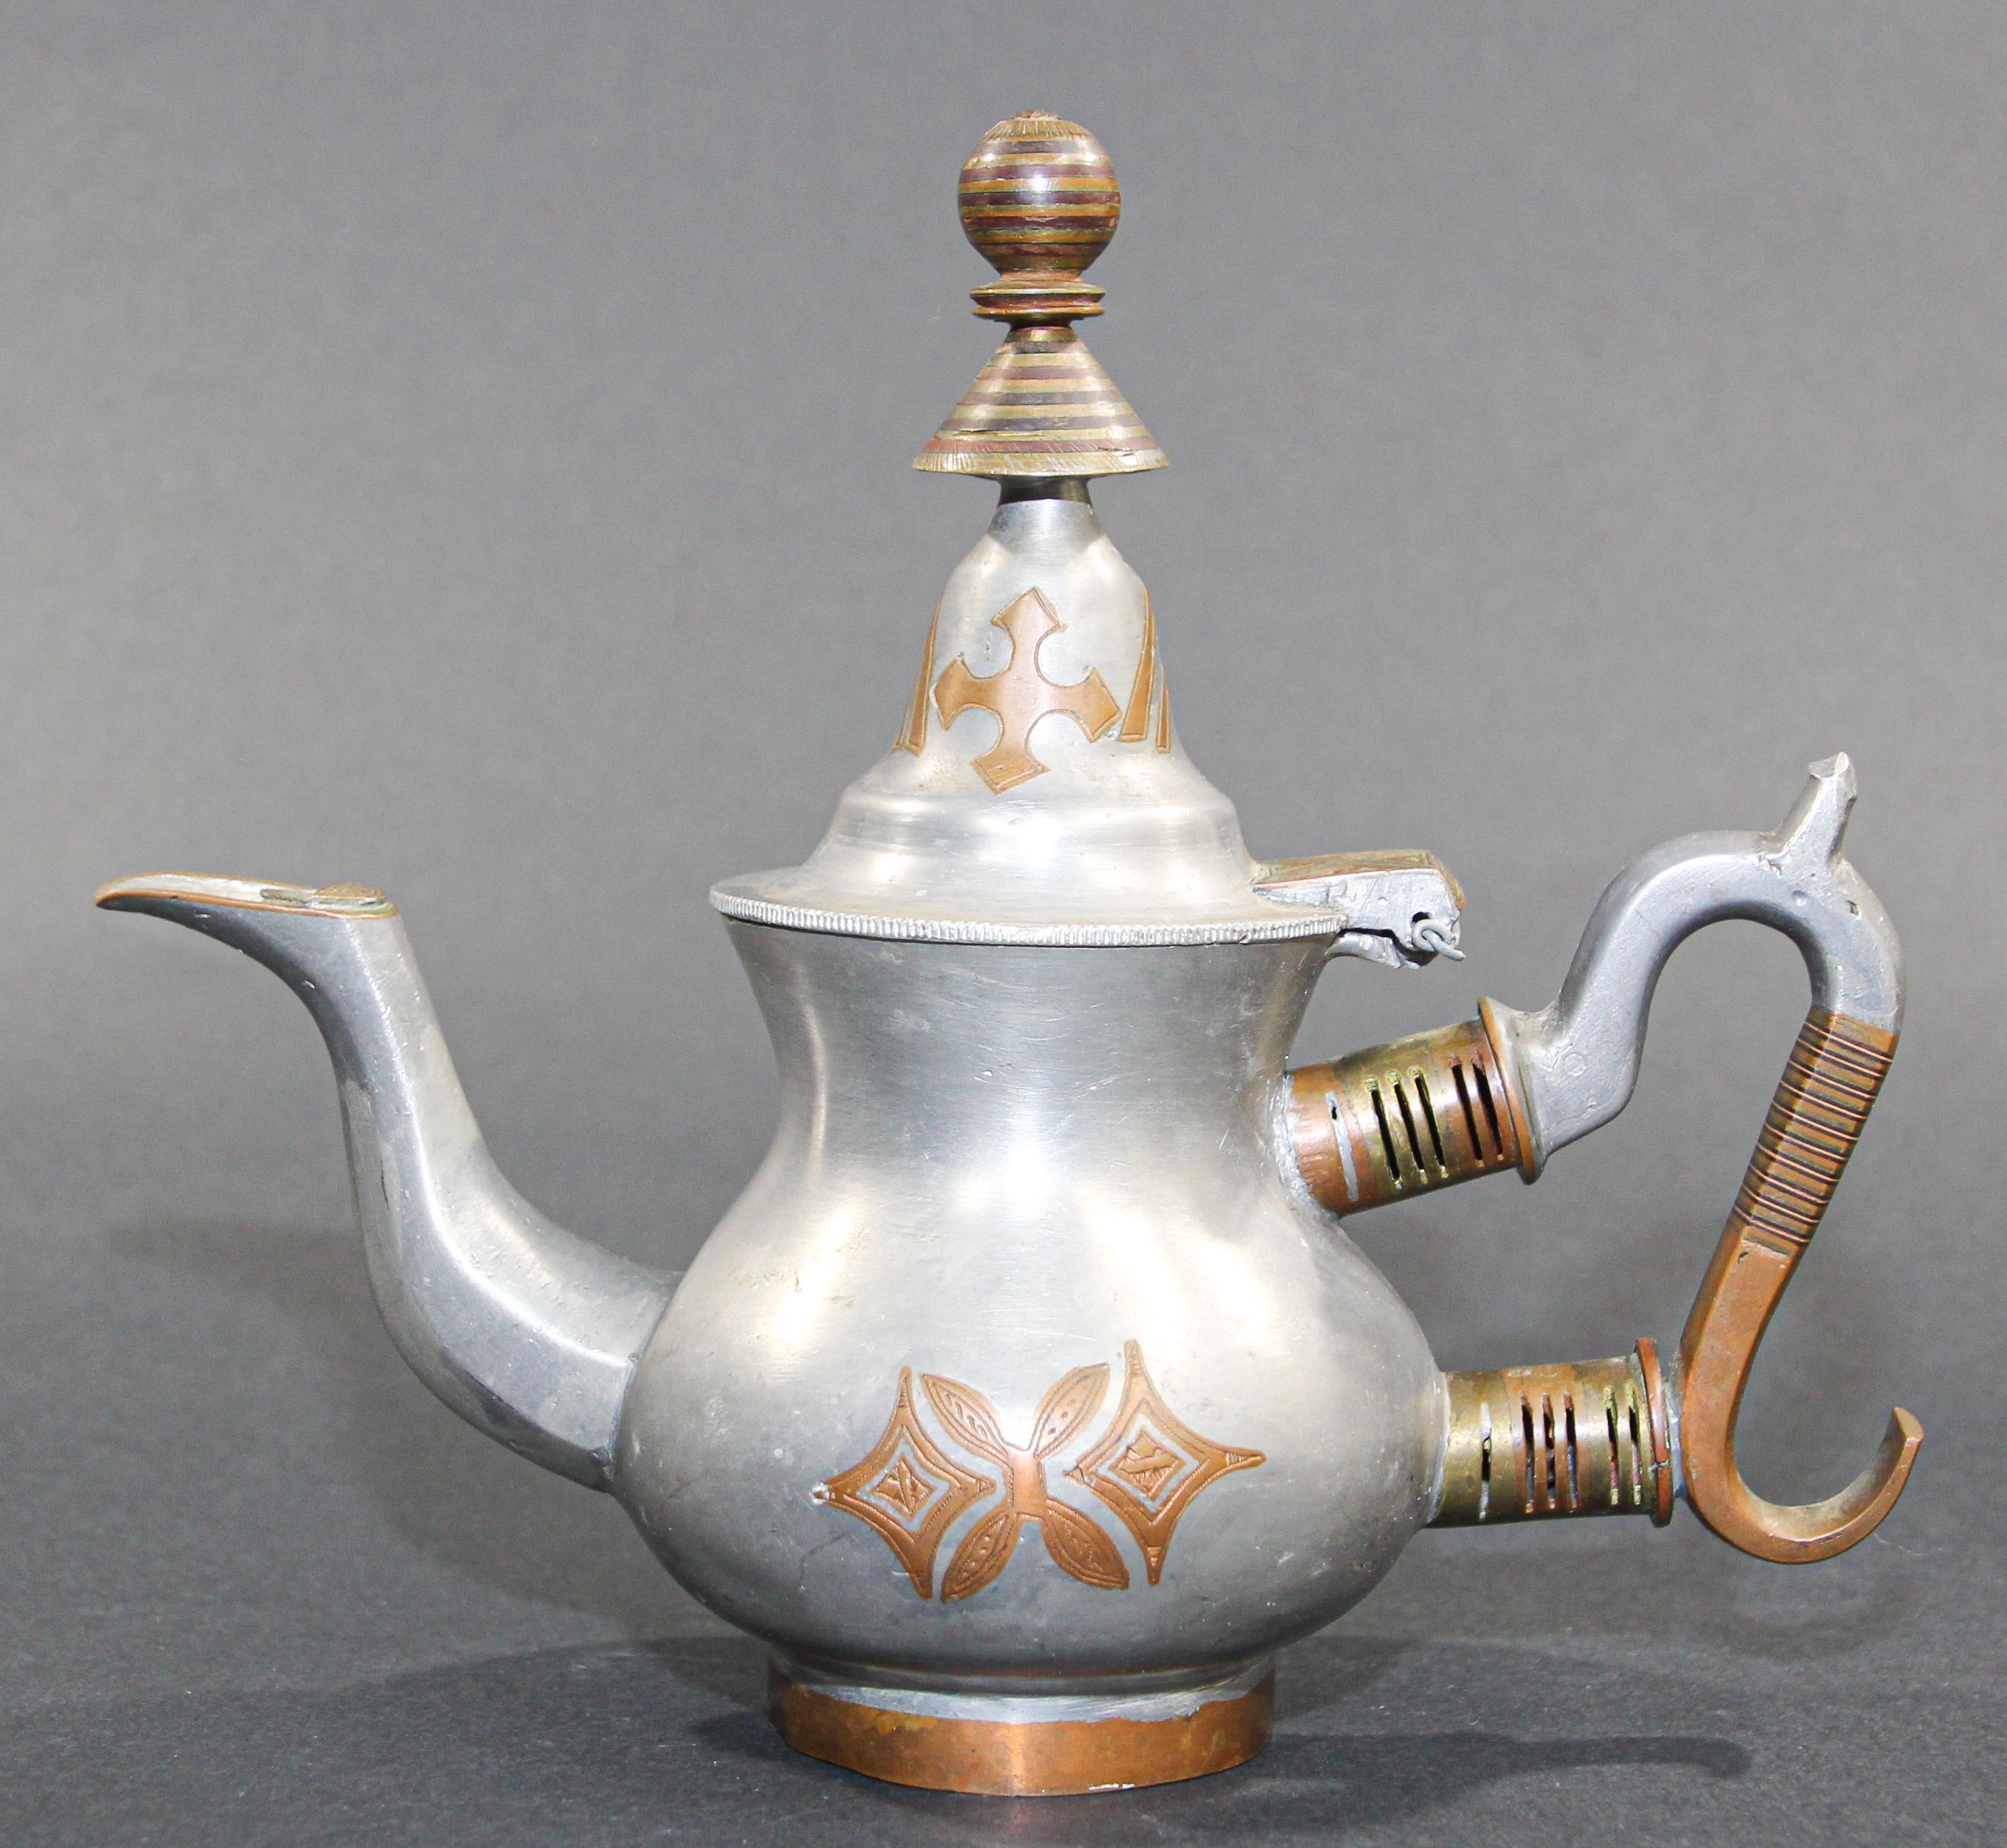 Vintage African Tuareg teapot Mauritania
Mid-20th century Tuareg teapot from Mauritania, Africa, Western Sahara.
Handcrafted of pewter, copper and brass decorations.
The Tuareg people inhabit a large area, covering almost all the middle and western